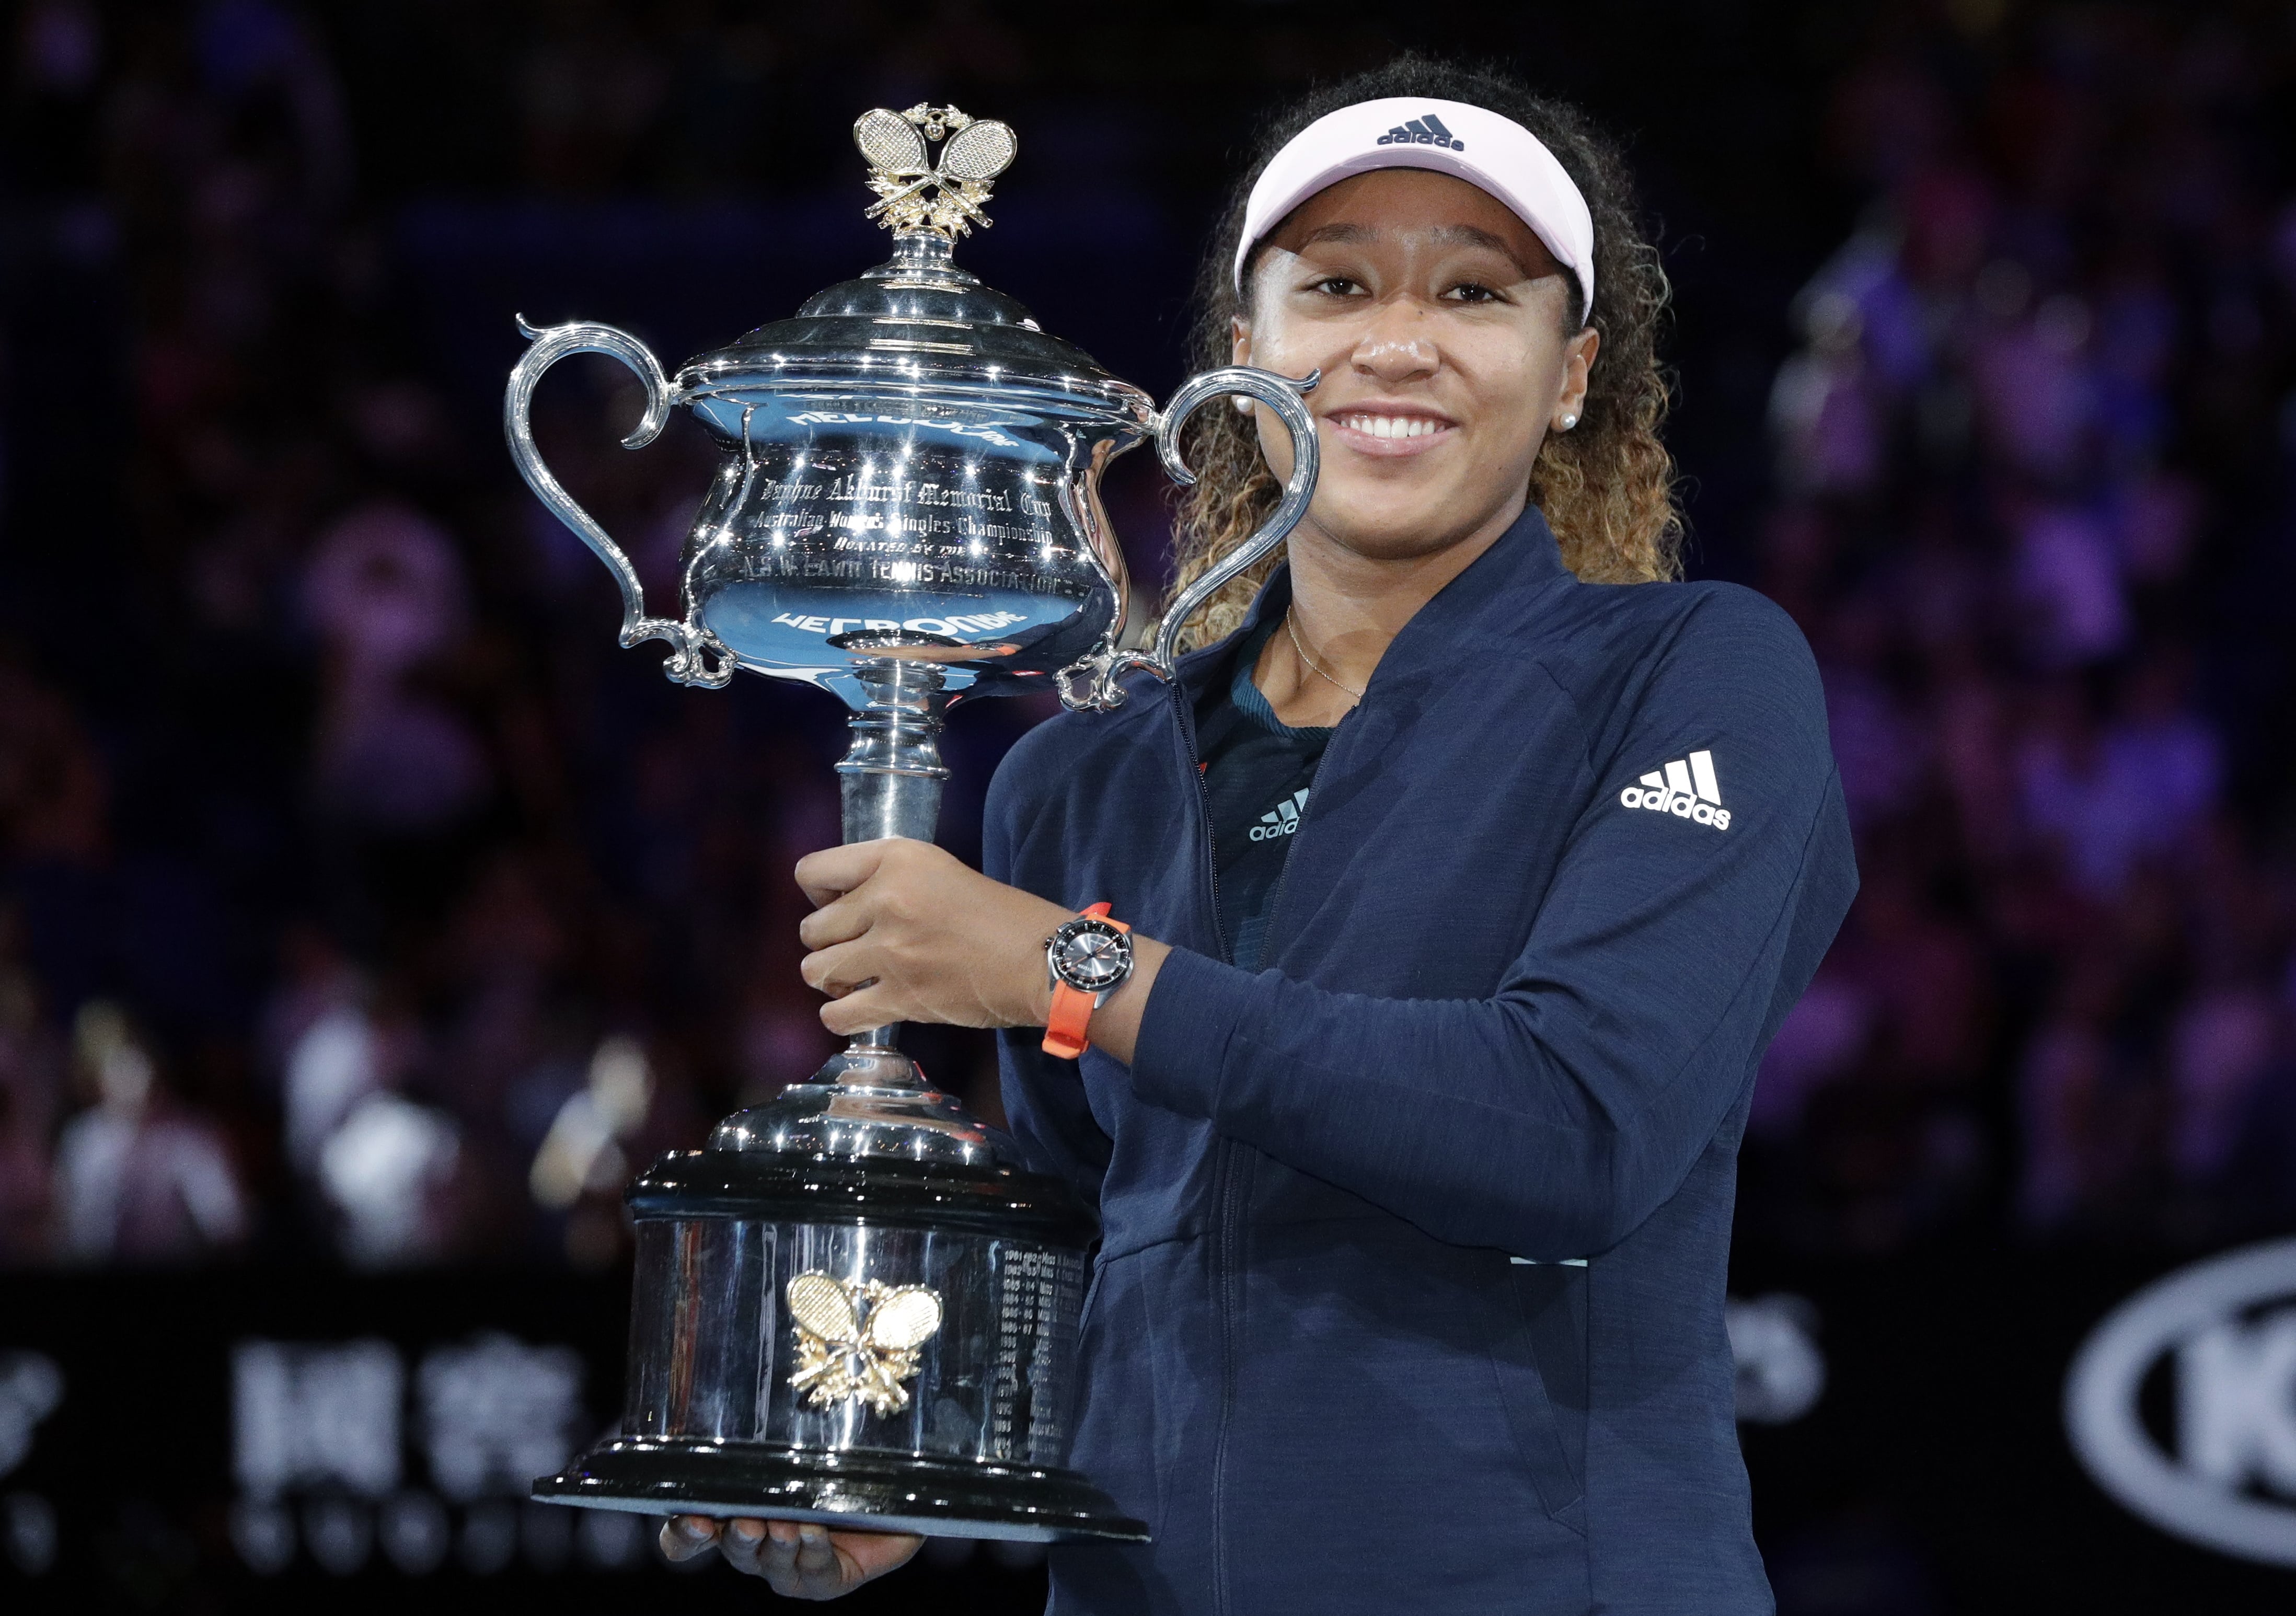 Japan's Naomi Osaka poses with her trophy after defeating Petra Kvitova of the Czech Republic in the women's singles final at the Australian Open tennis championships in Melbourne, Australia, Saturday, Jan. 26, 2019.